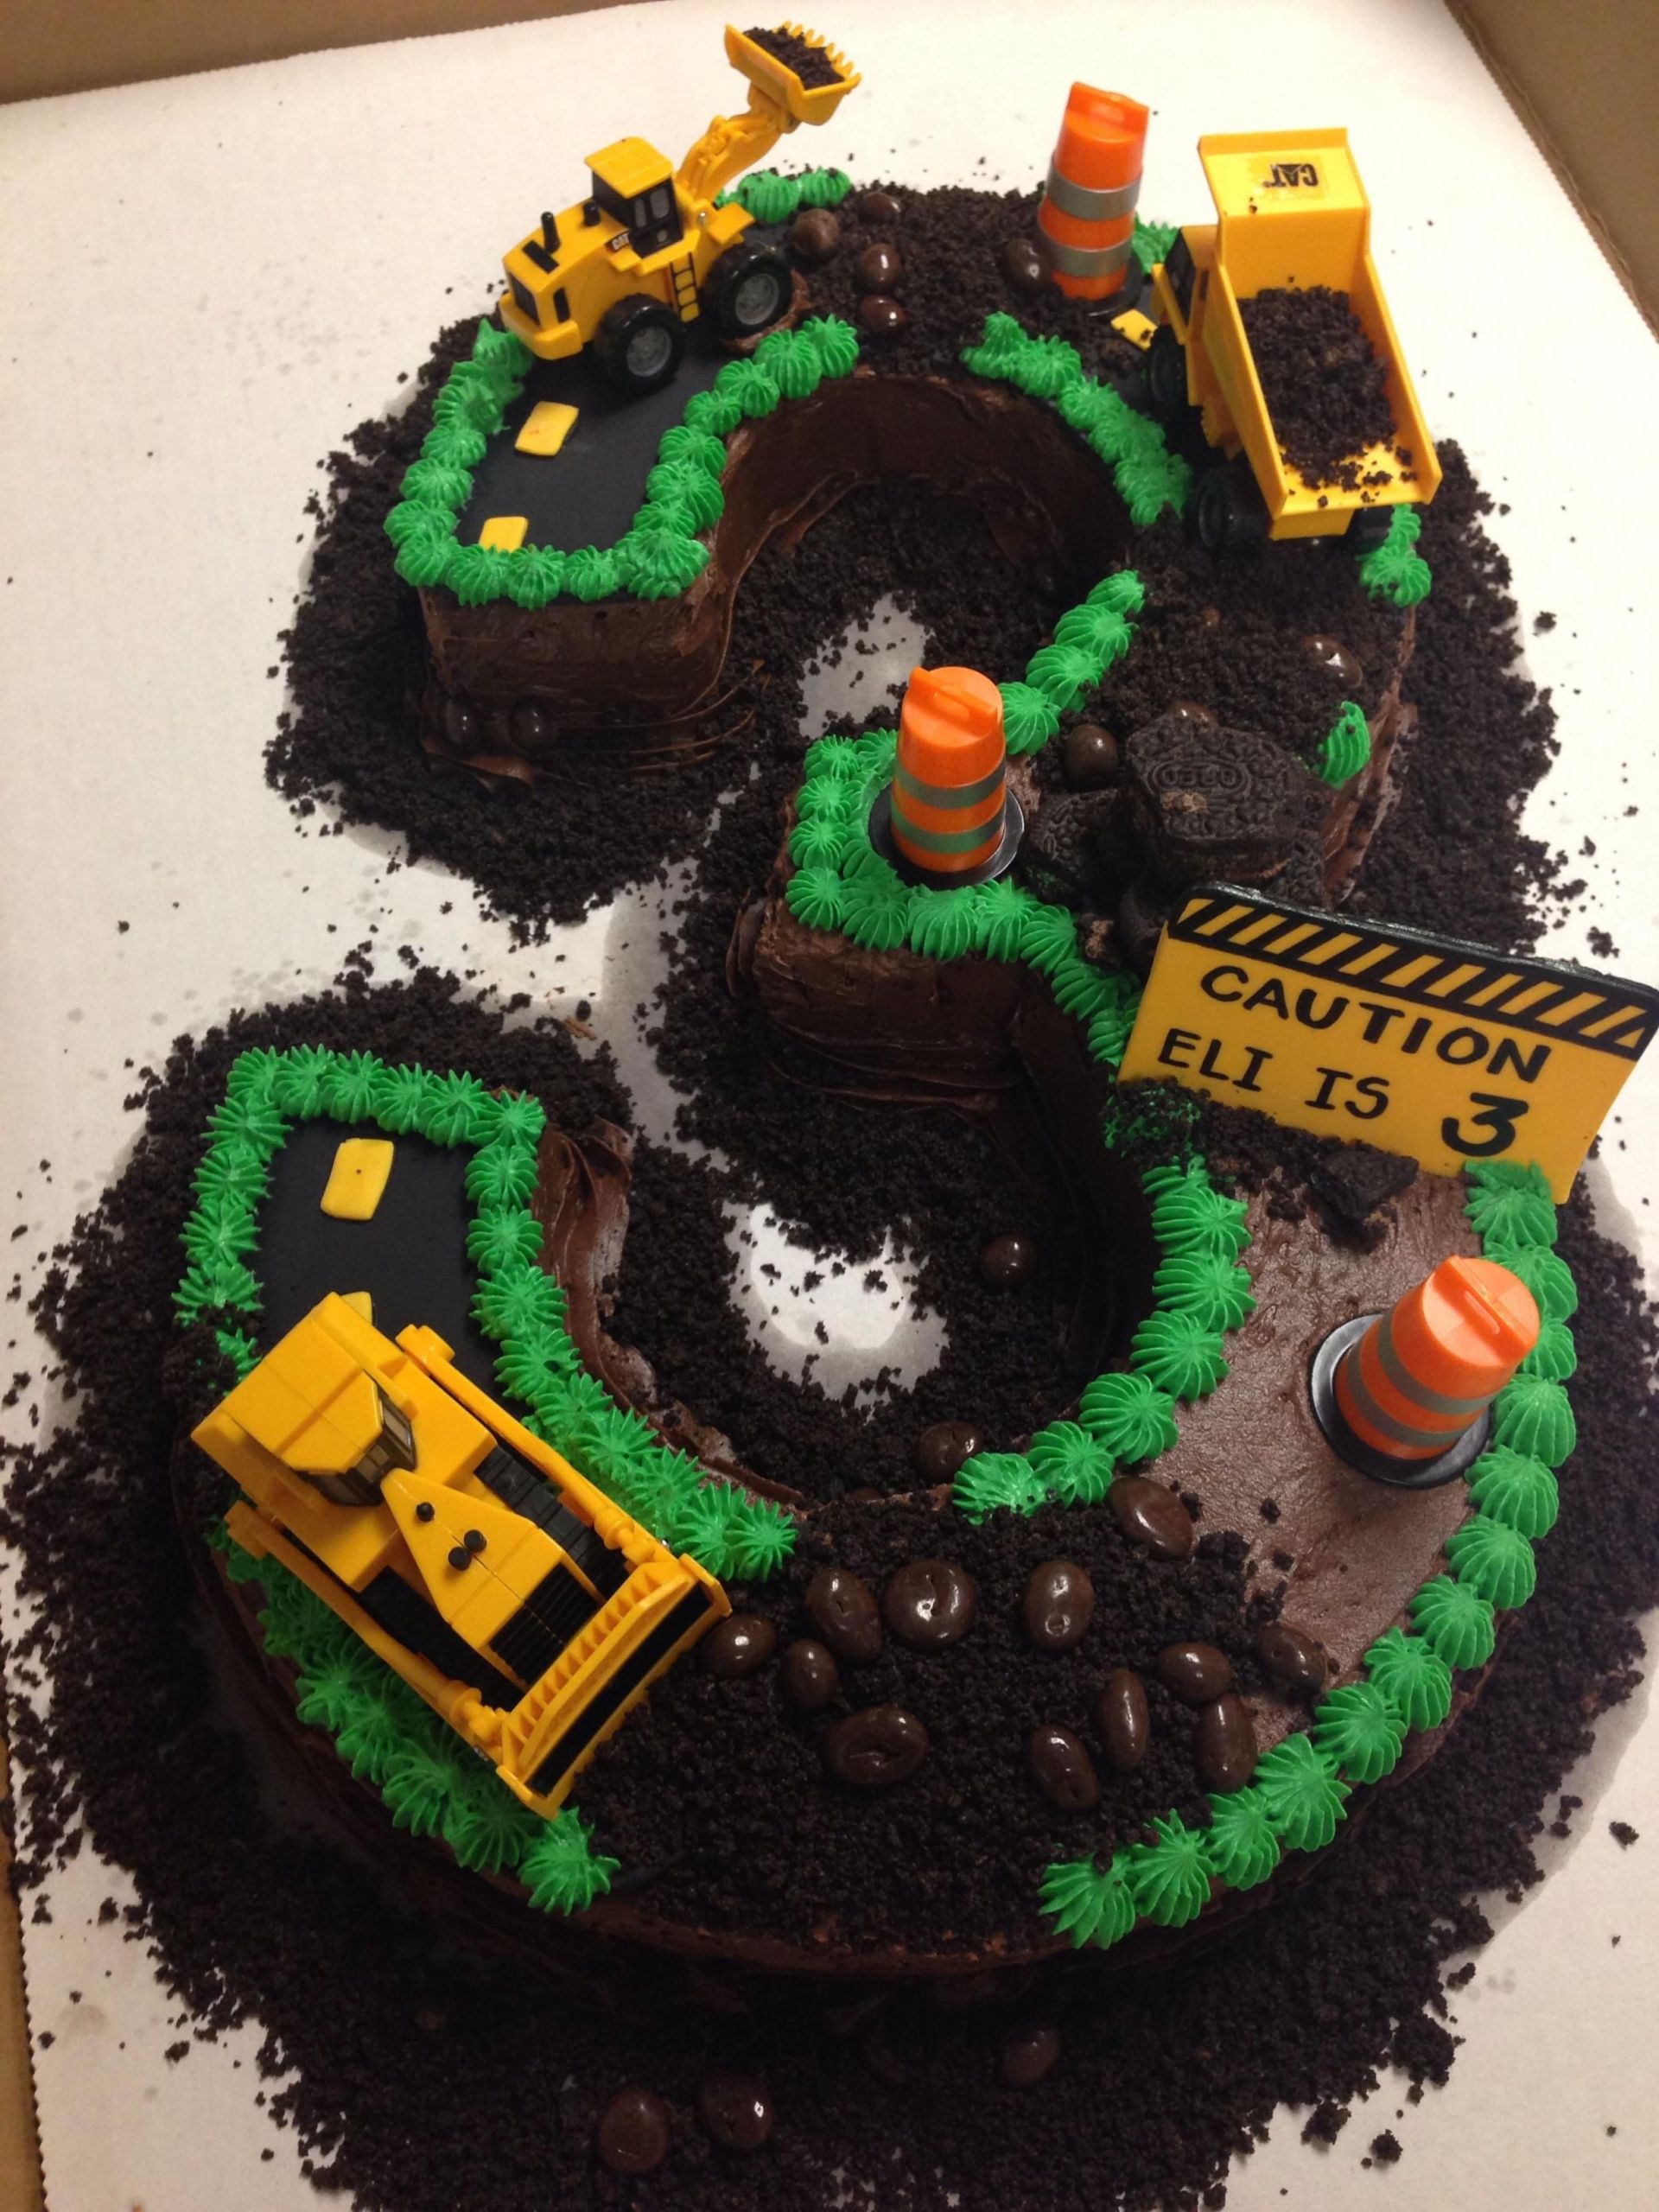 3 Year Old Birthday Party Ideas Pinterest
 Construction Site Cake in 2019